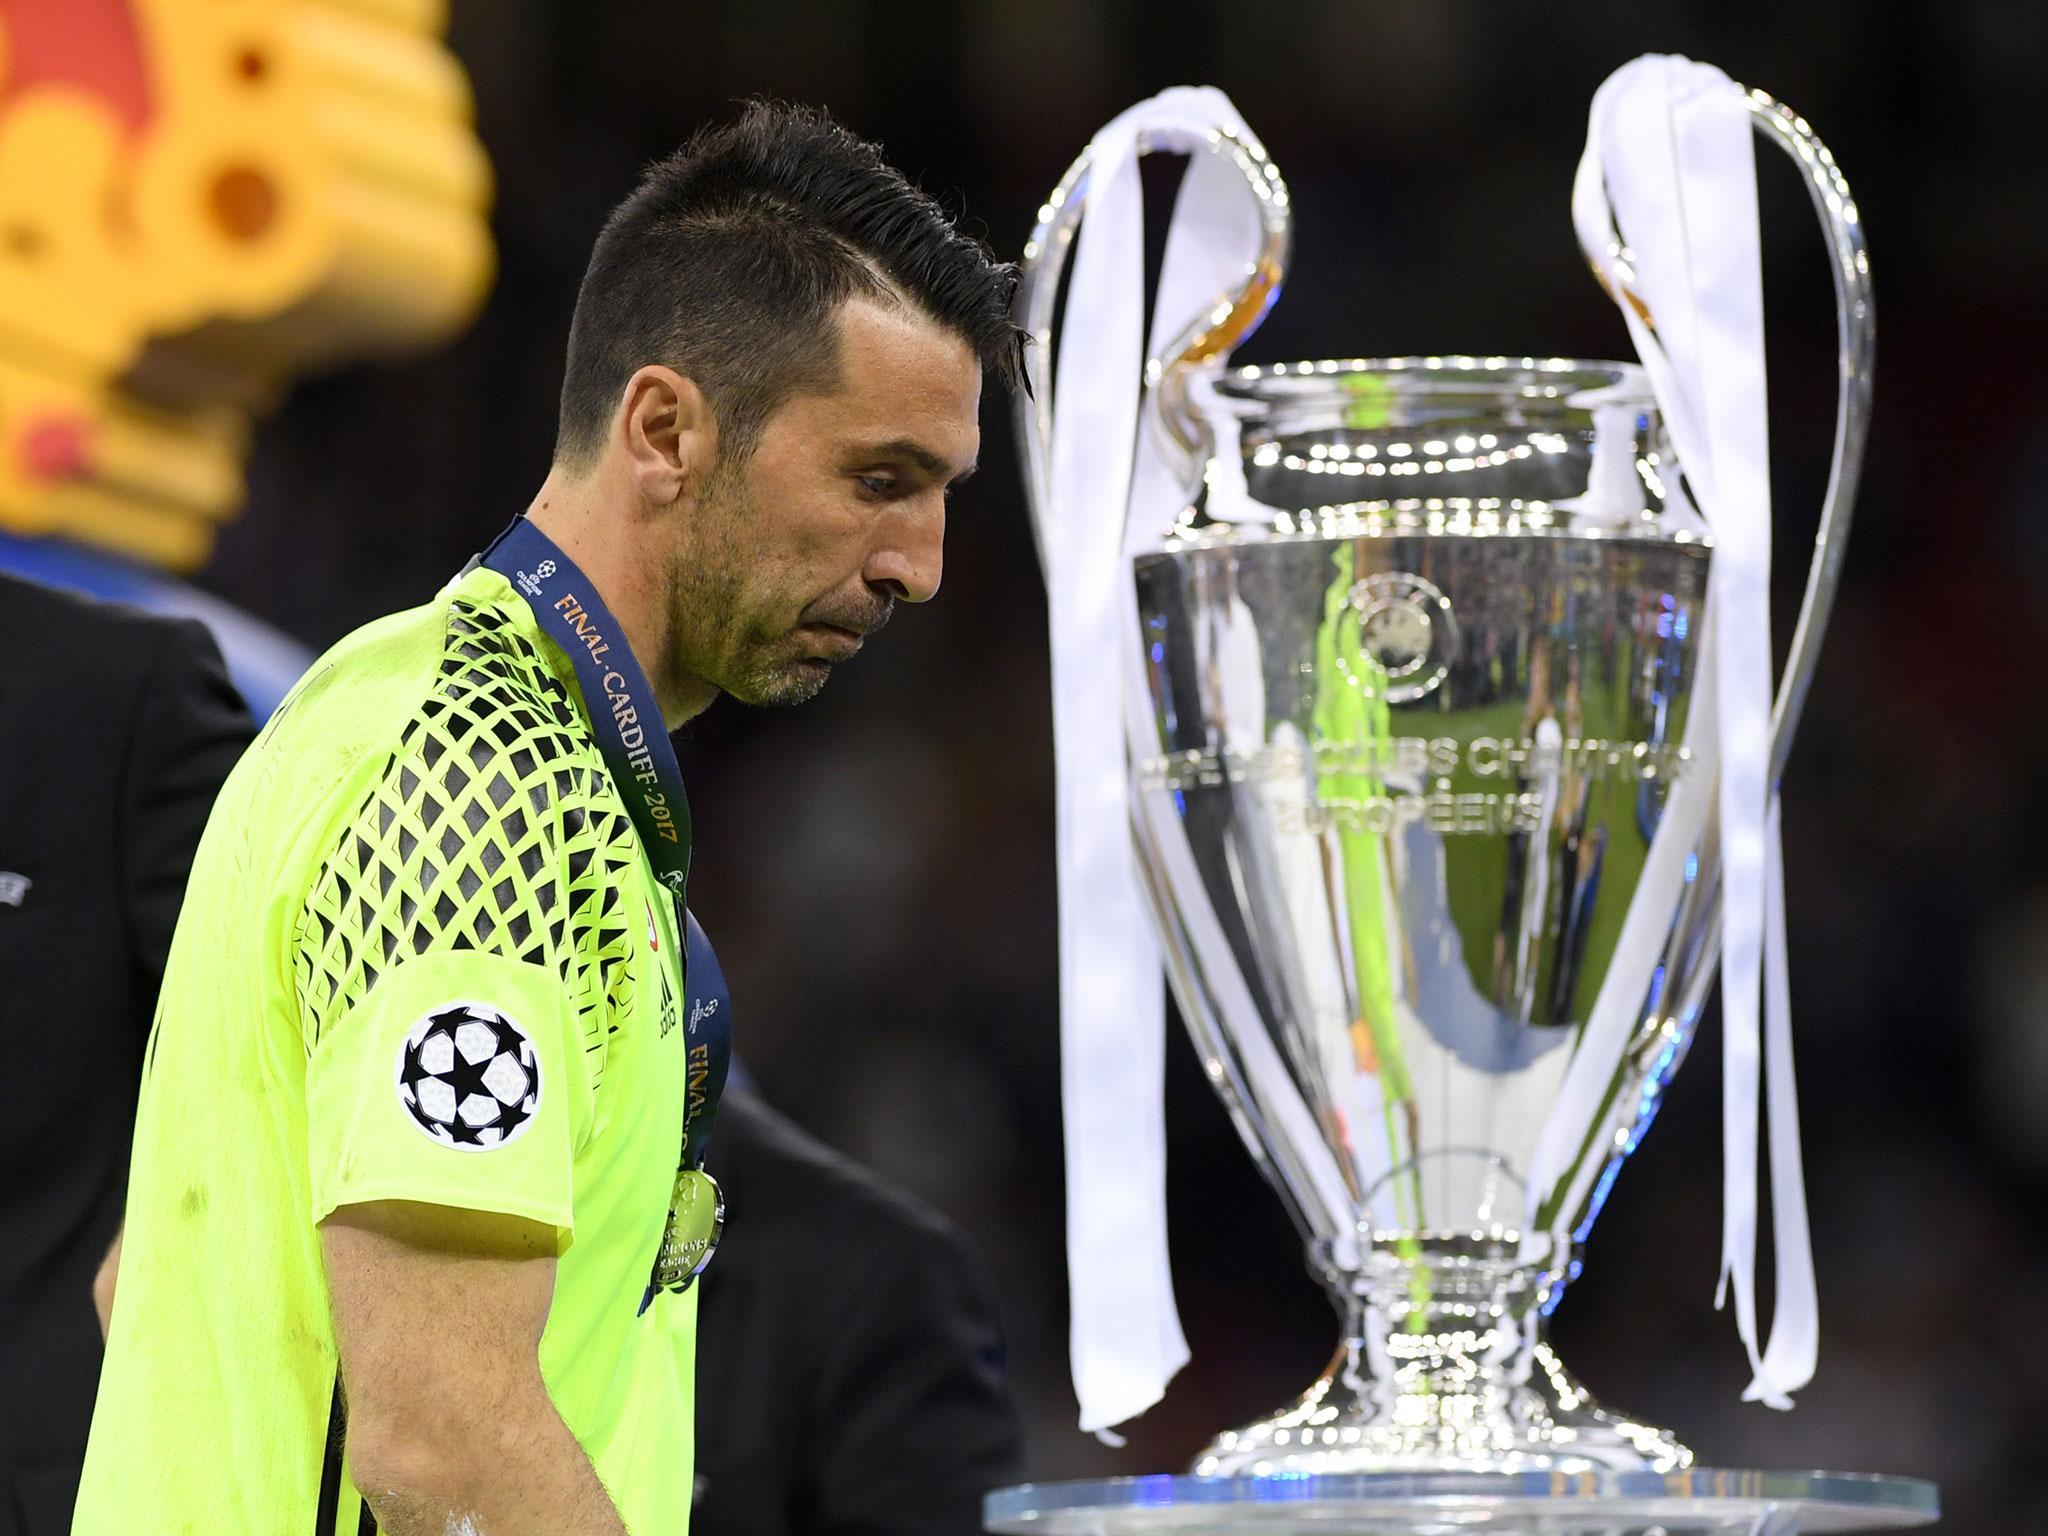 Gigi Buffon lost in the Champions League final for the third time